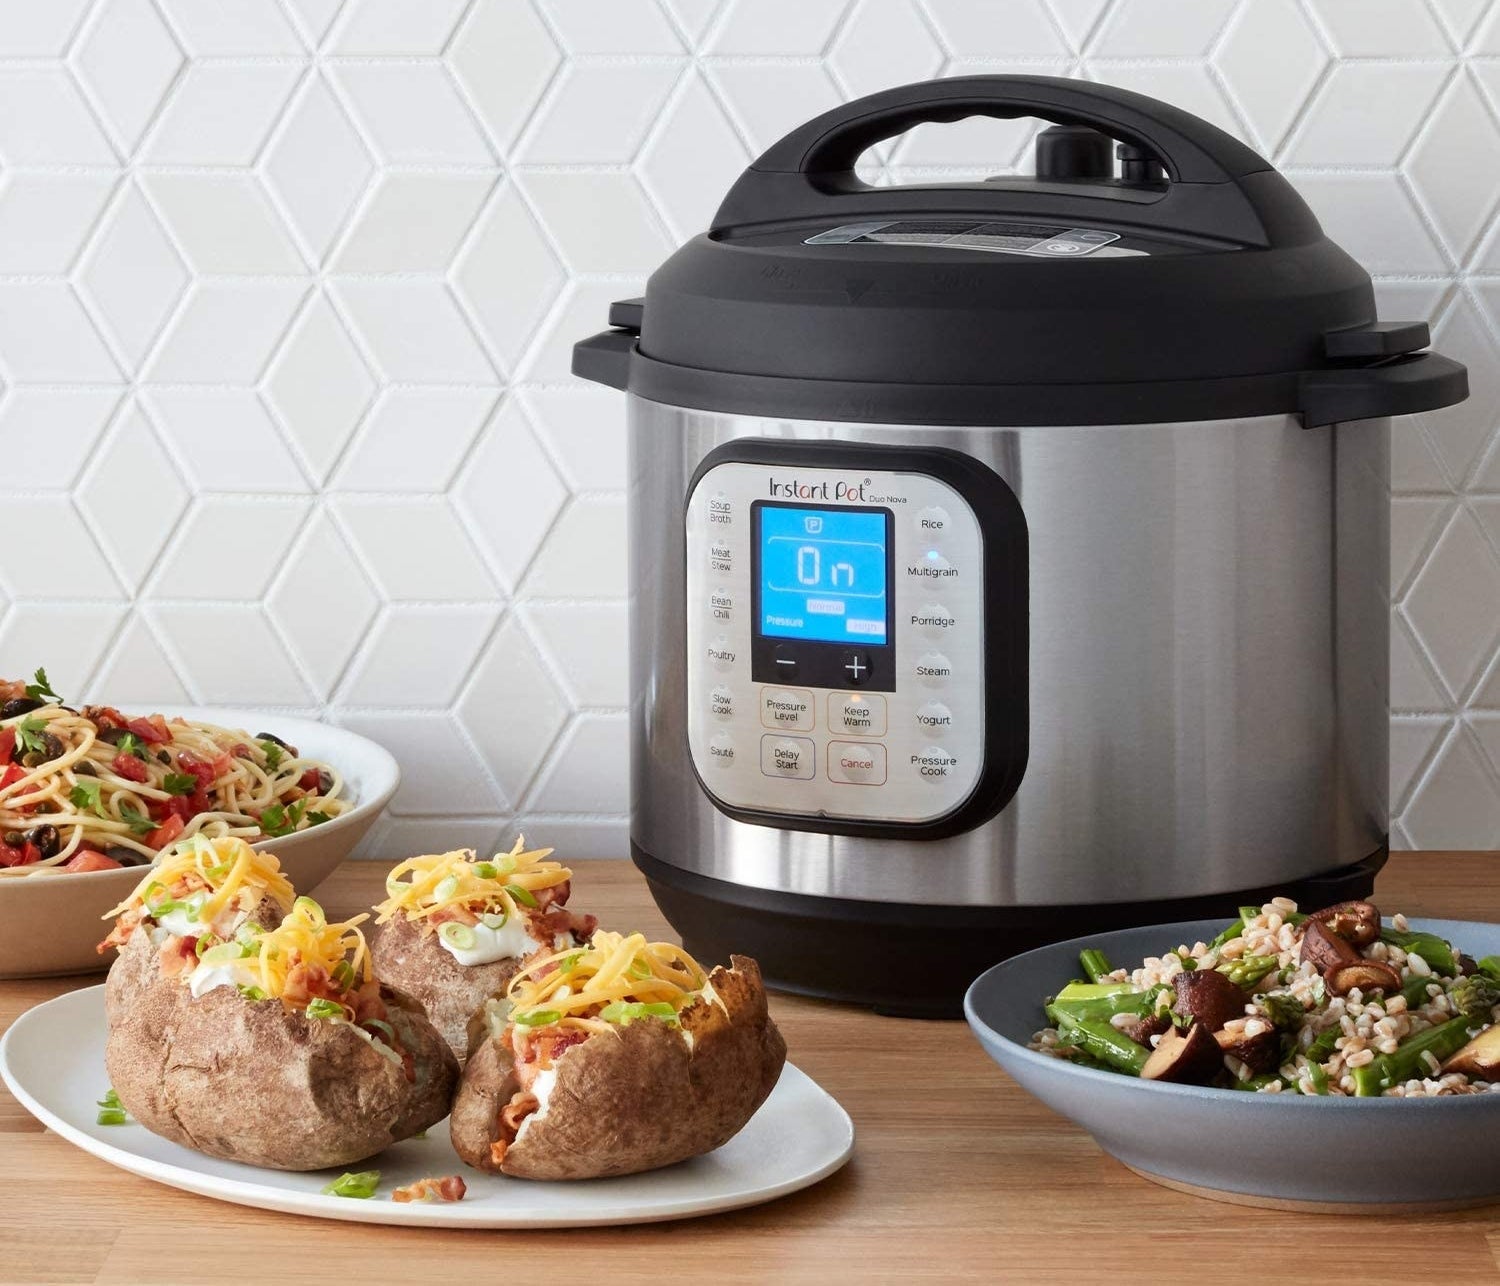 An Instant Pot next to plates of baked potatoes and other delicious meals